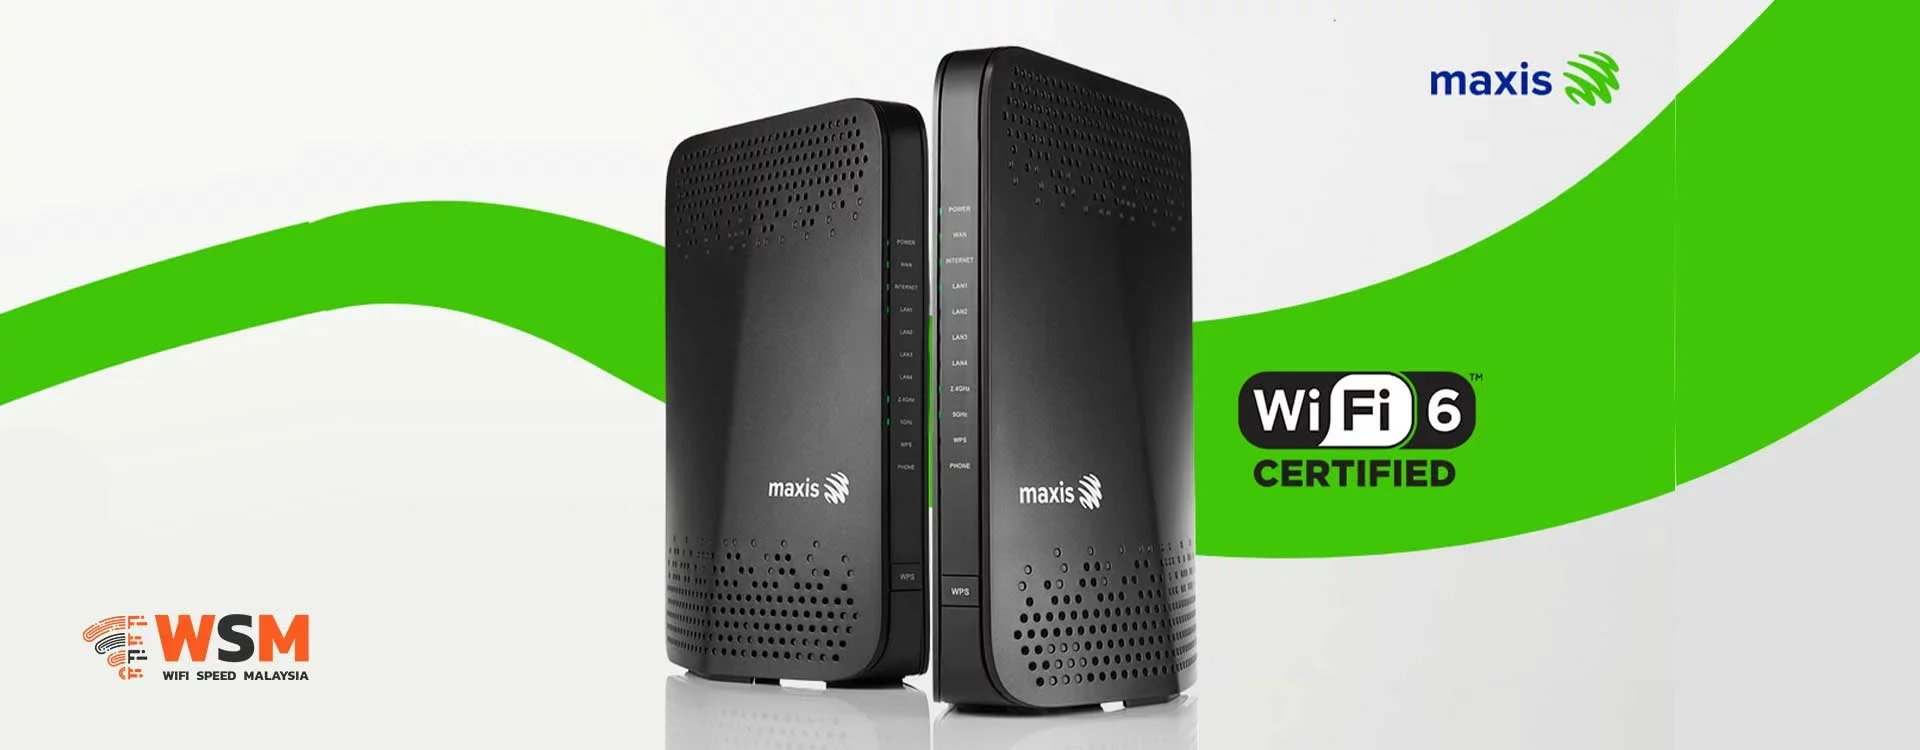 Maxis FIbre-WITH Wifi-6-certified-router